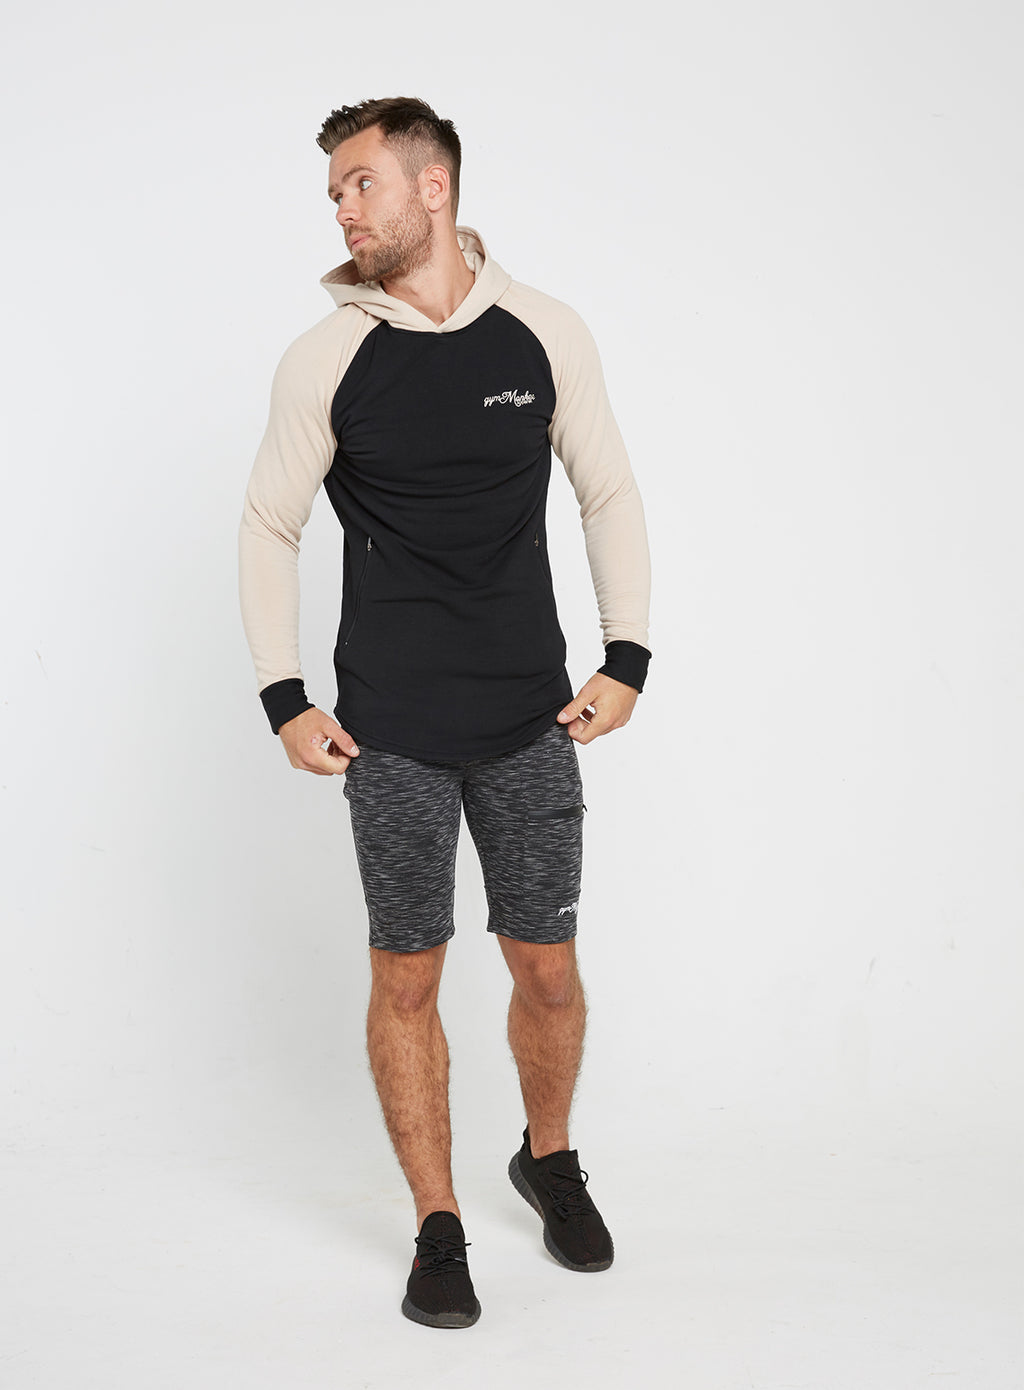 Gym Monkee - Black and Sand Hoodie FRONT FULL